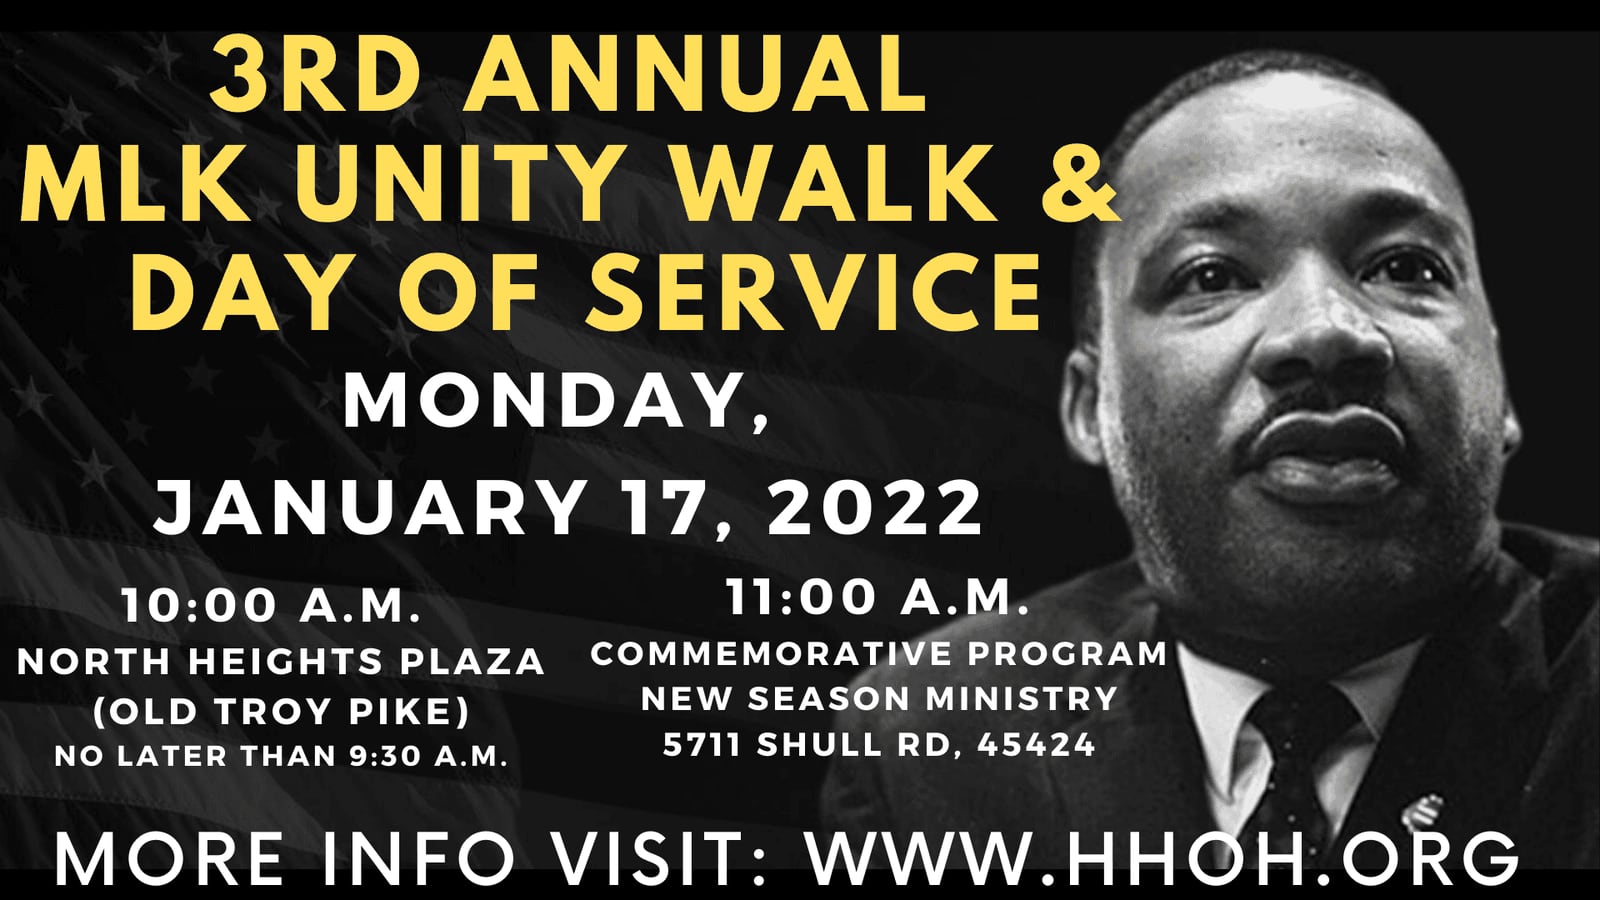 Huber Heights set to hold 3rd annual MLK Unity Walk WHIO TV 7 and